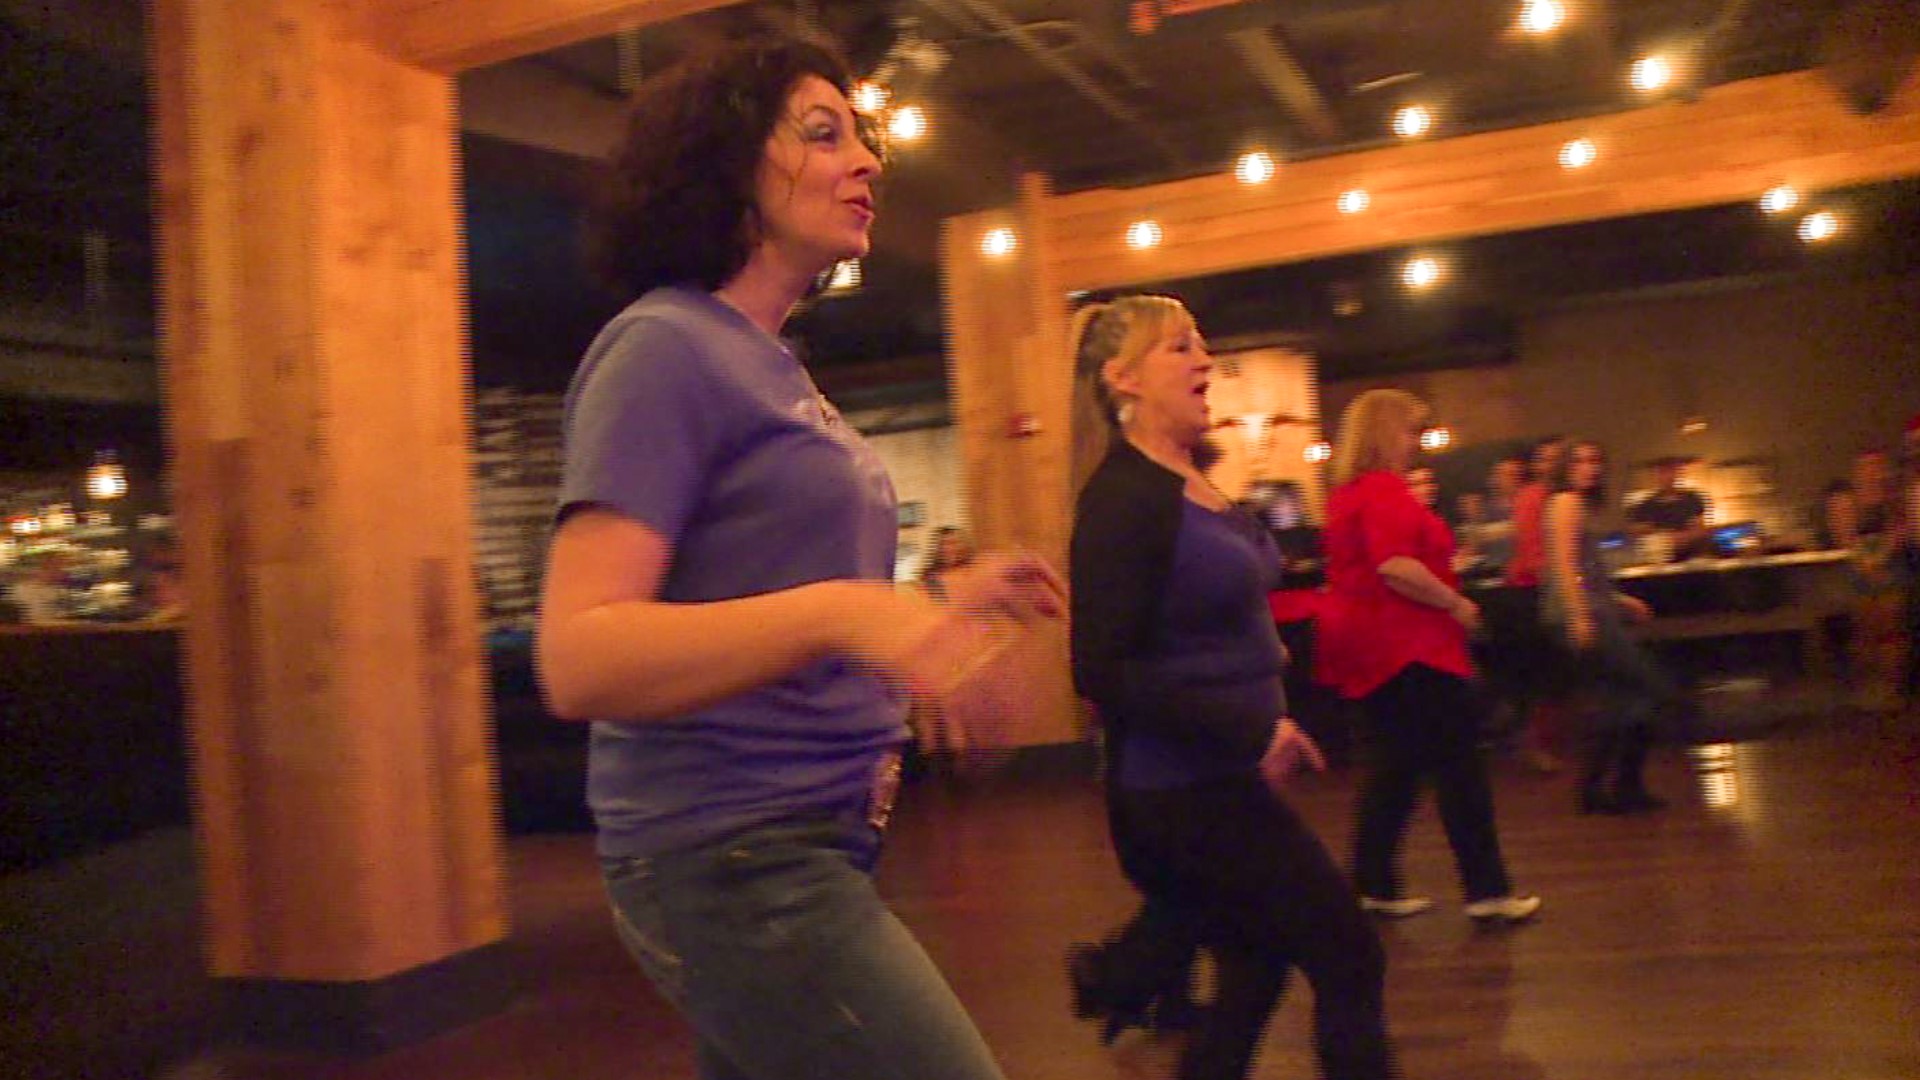 The Dancing Dragons, a Tacoma team made up of line dancing fanatics, are promoting line dancing among pop and R&B fans. #k5evening